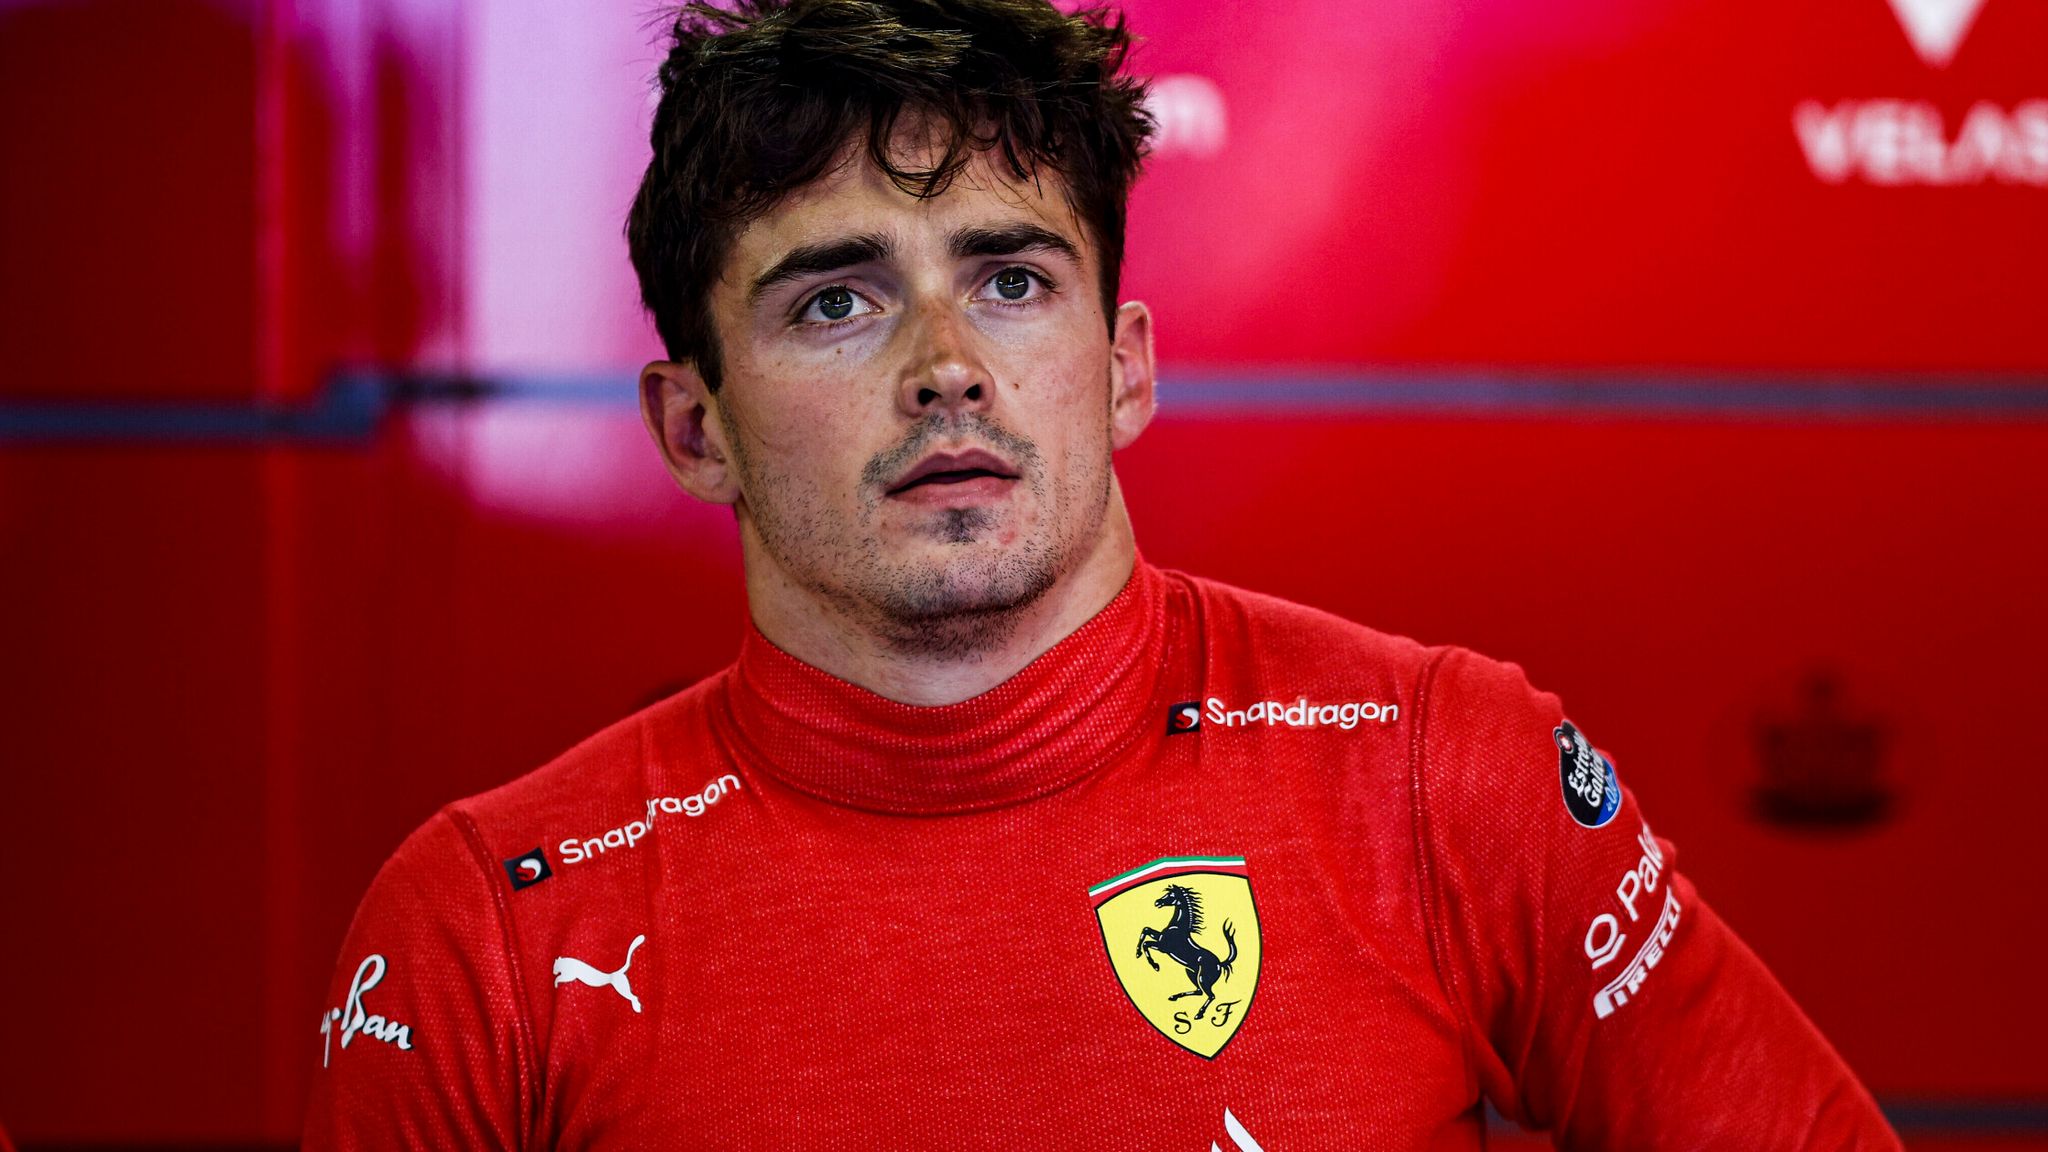 BREAKING NEWS: Charles Leclerc a driver of Ferrari has been suspended from F1 motor racing due to….